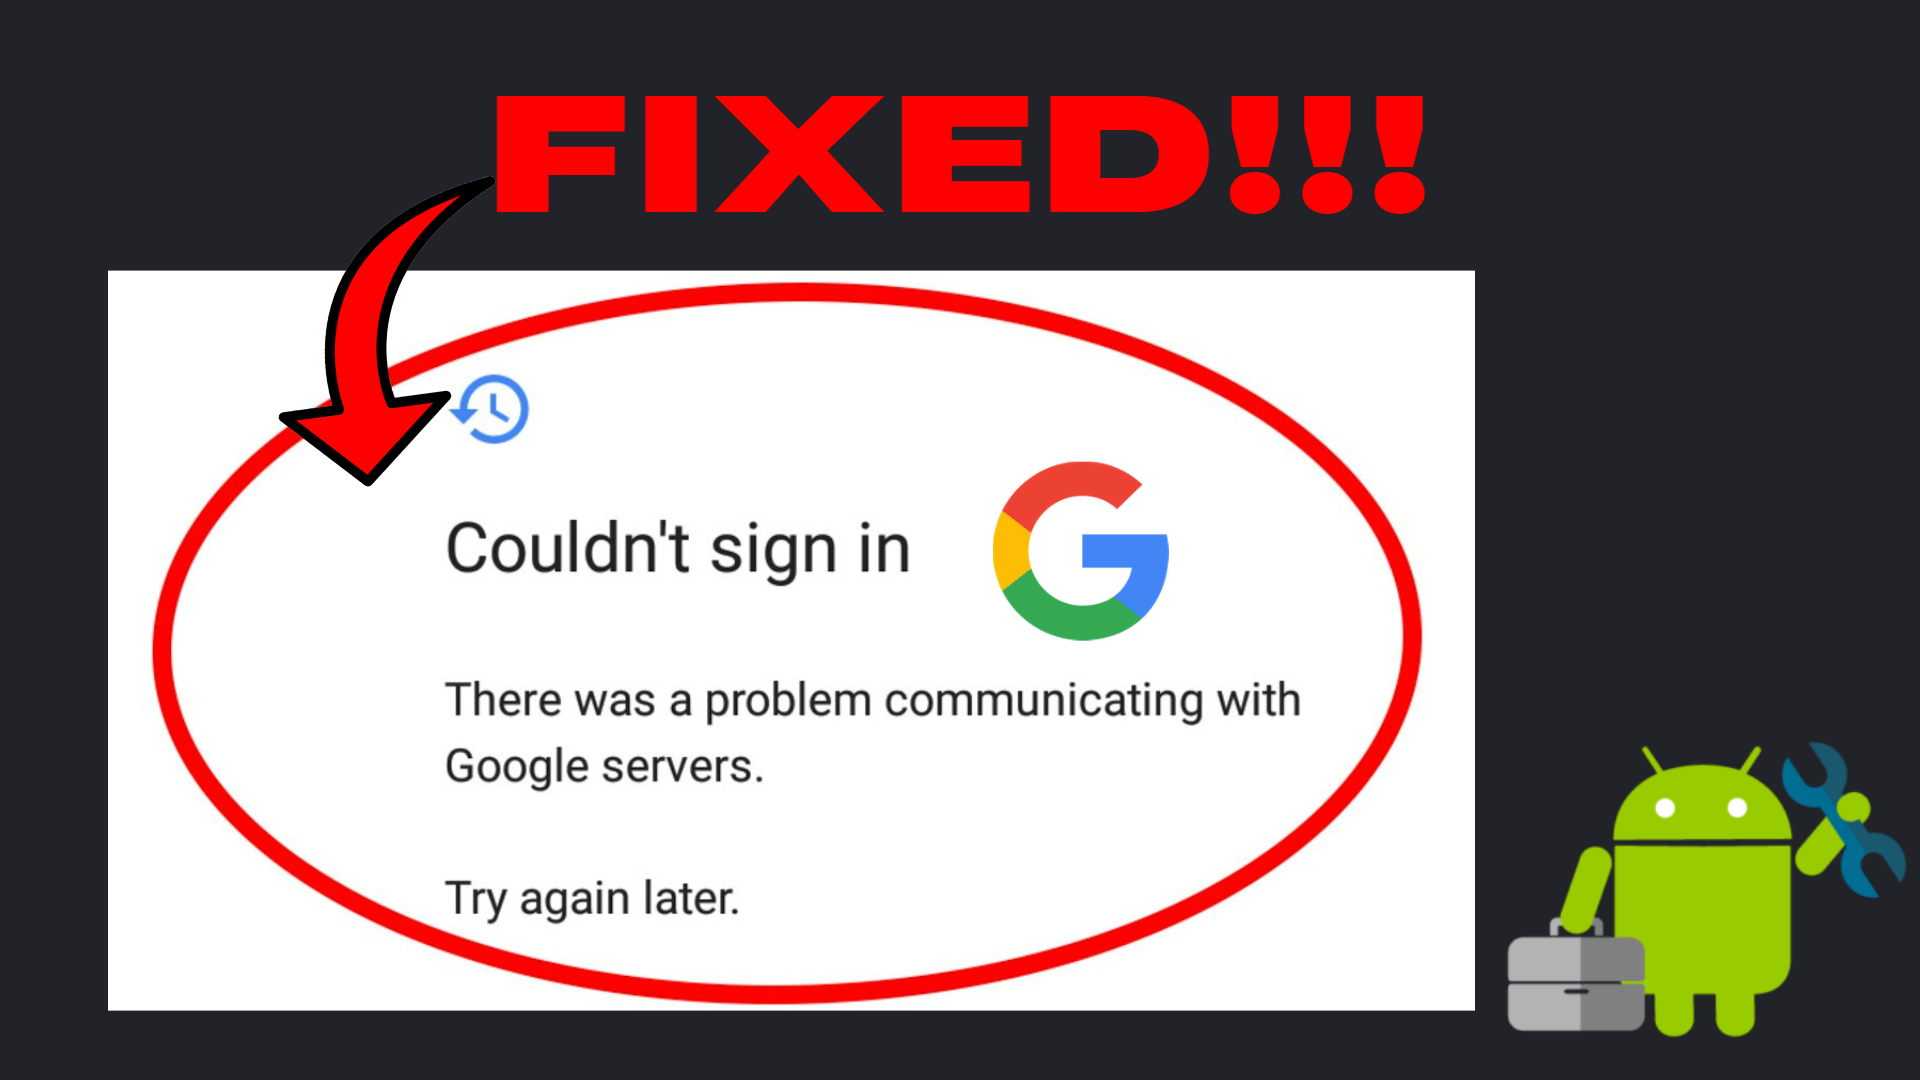 Resolve Google server communication problems with step-by-step solutions
Fix Google server communication errors that prevent proper functioning of Android apps